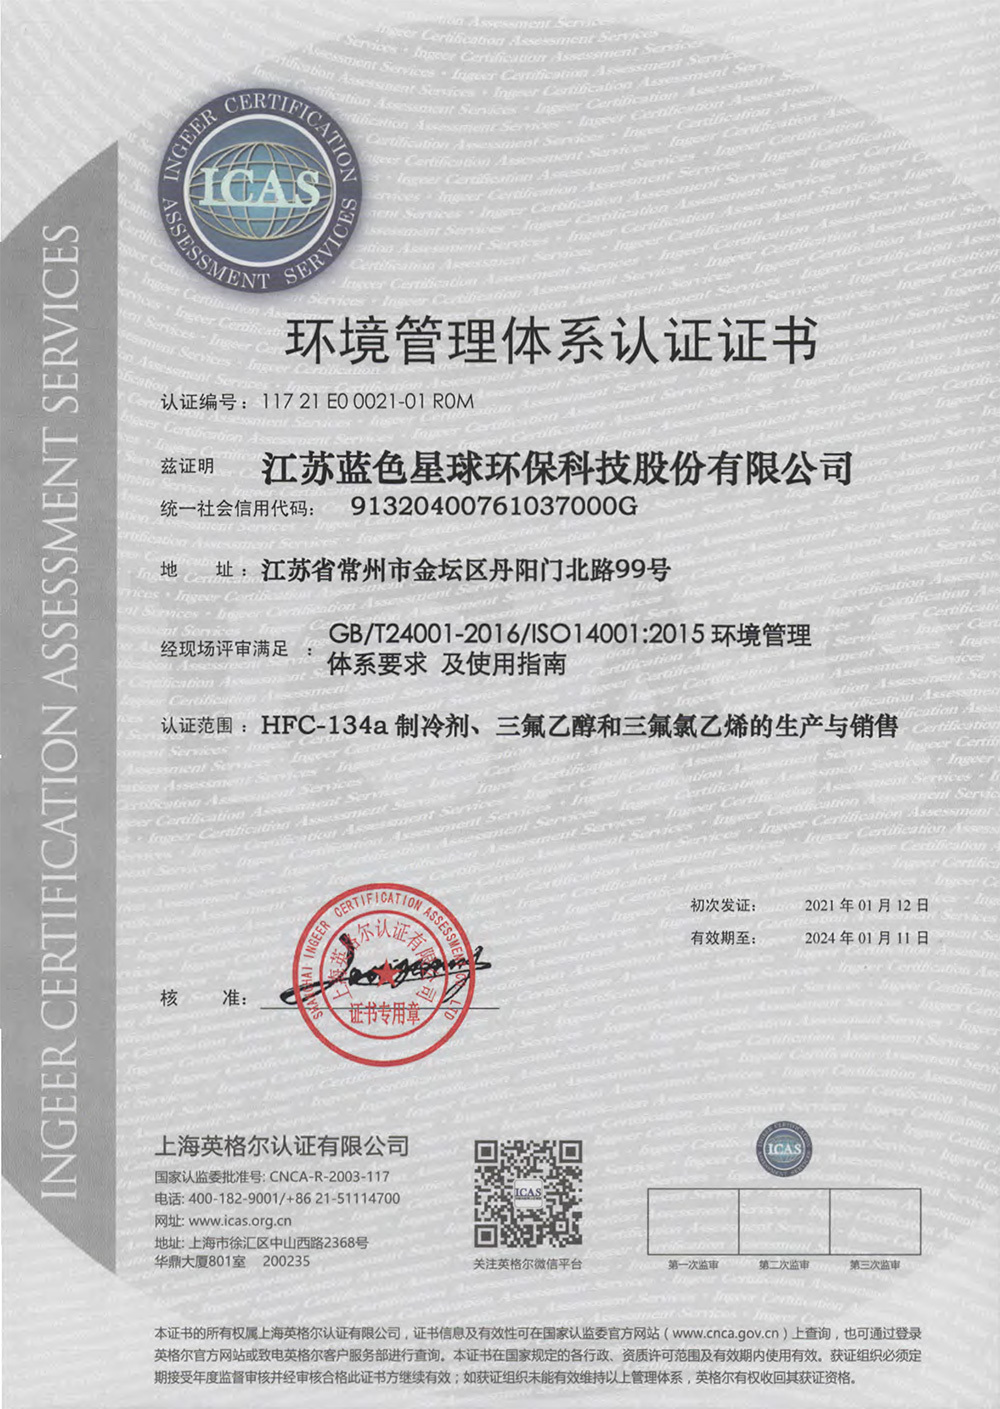 Safety and Environmental Systems Certificate 2021